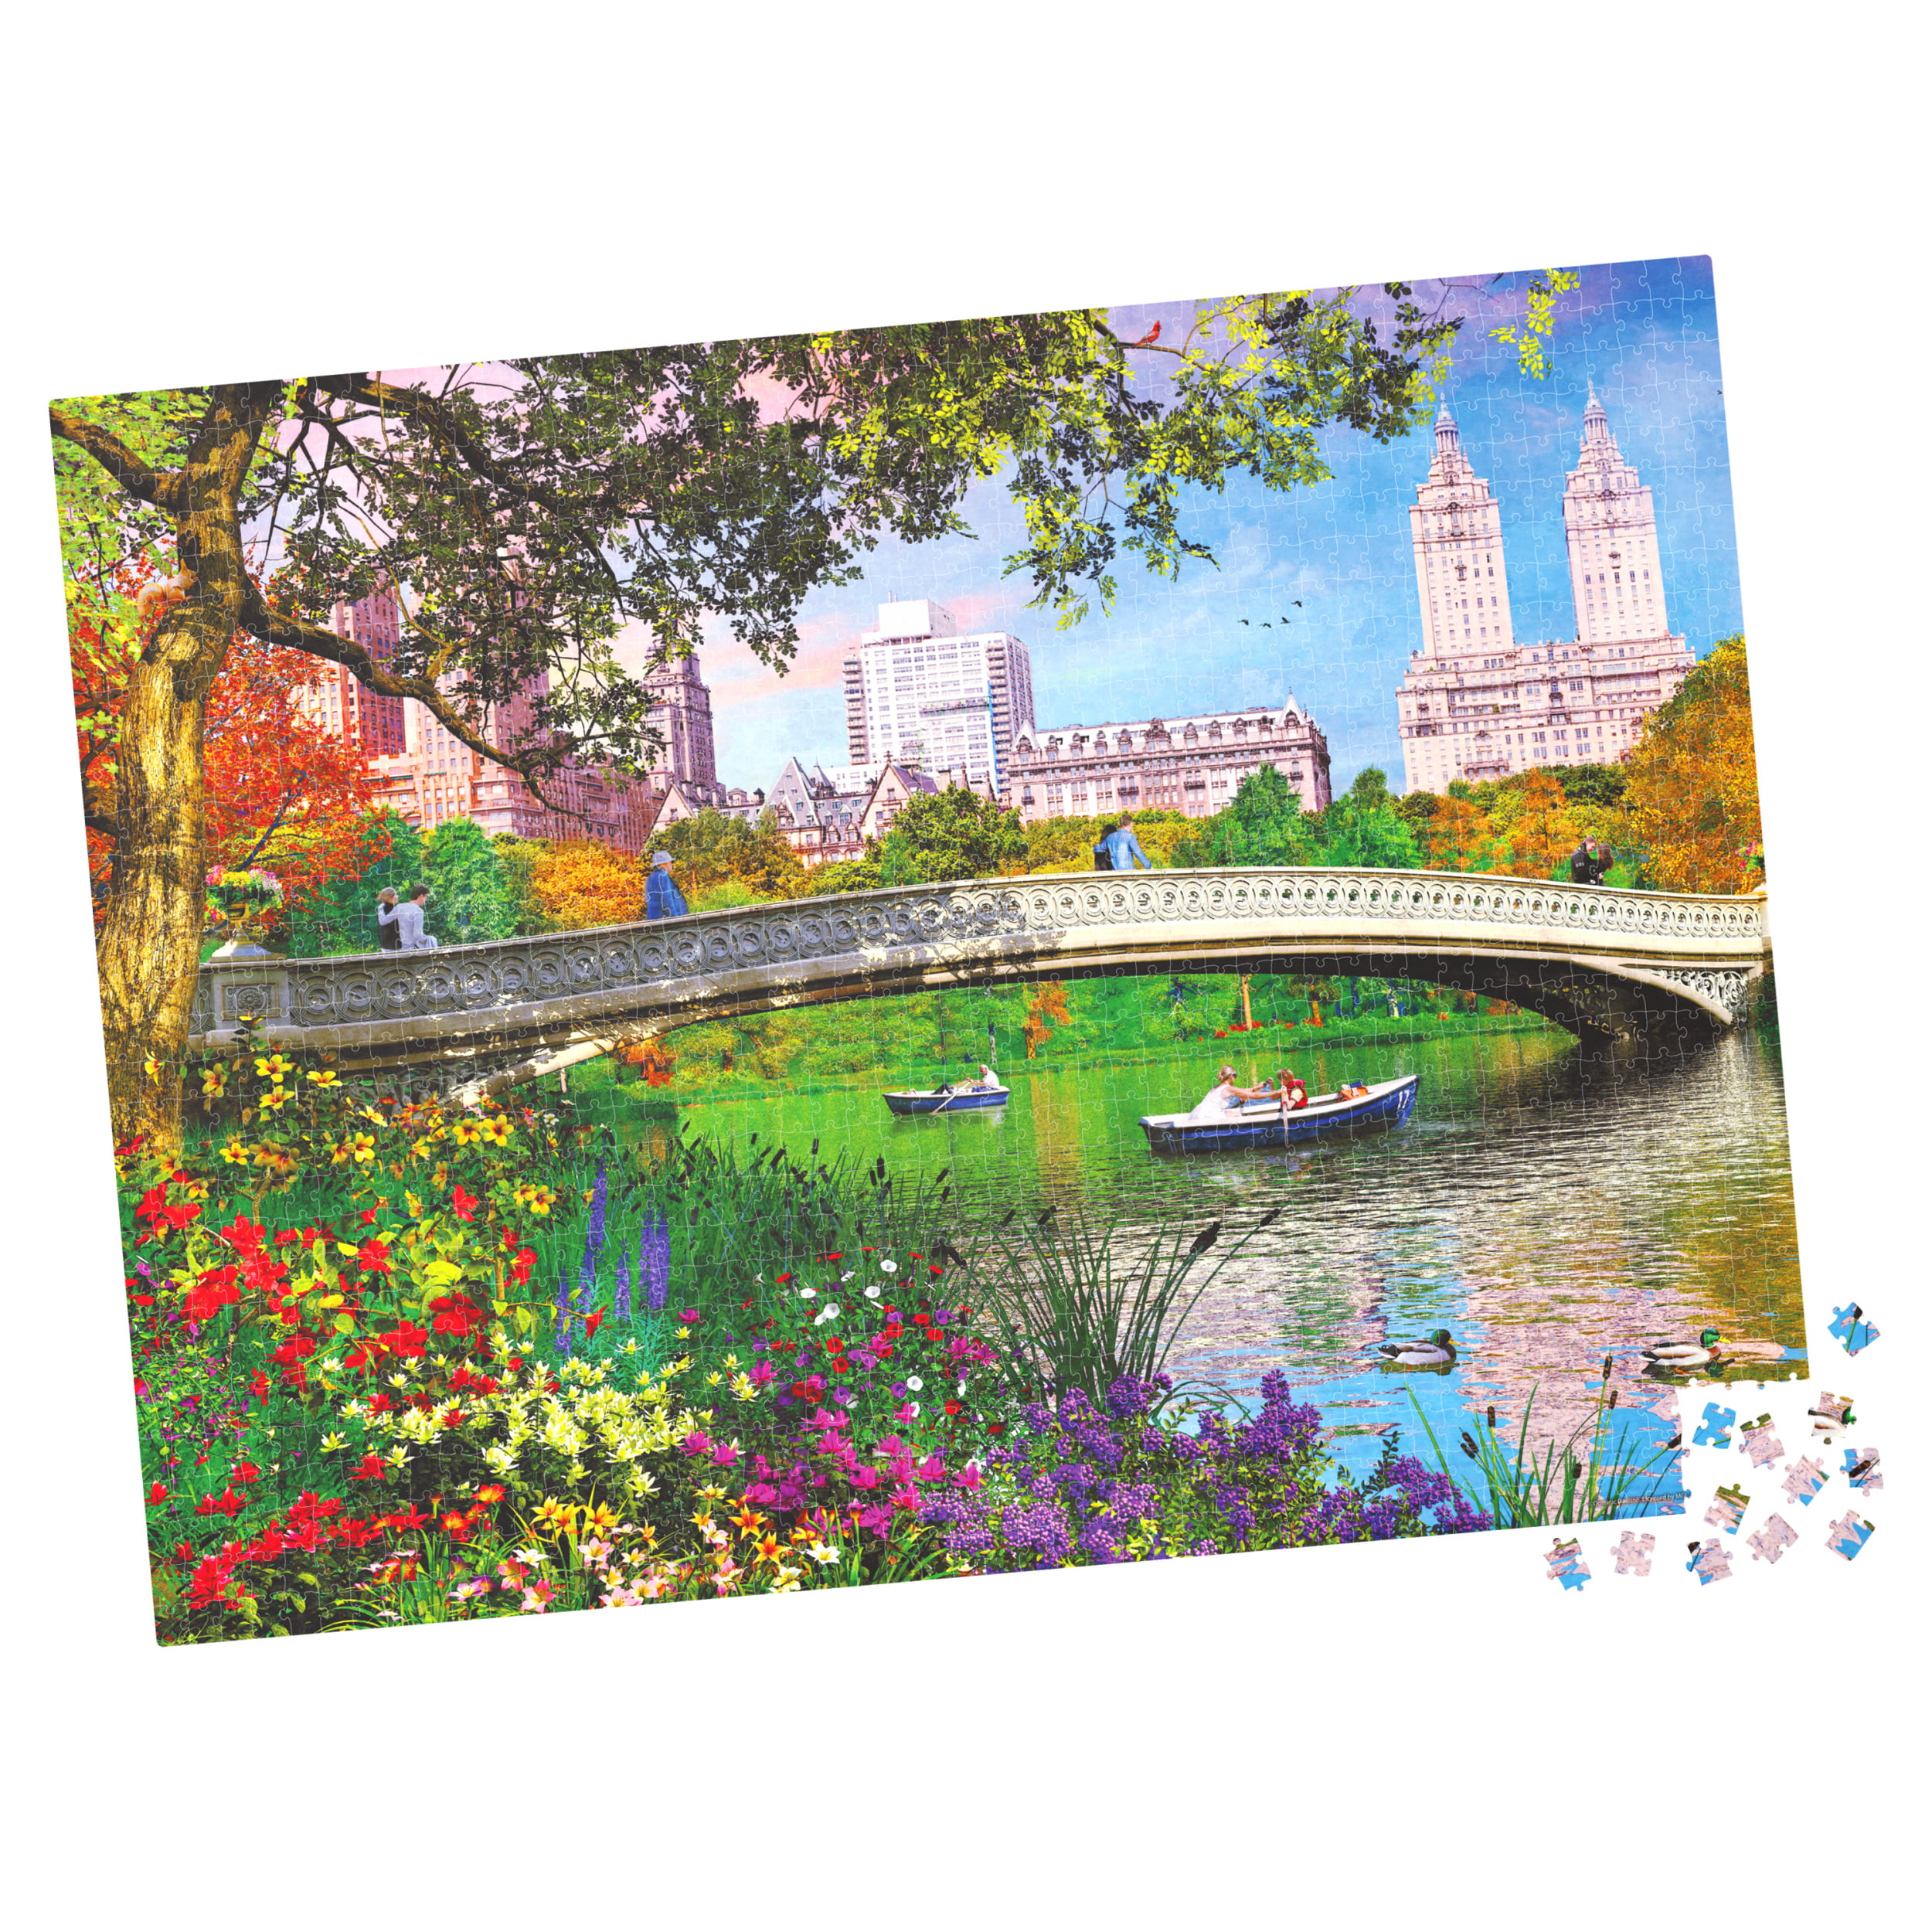 2000 Piece Adult Puzzle Fun Puzzles Wooden Puzzle Jigsaw Puzzle Toys Creative Gifts Fun Family Games Wooden Bridge